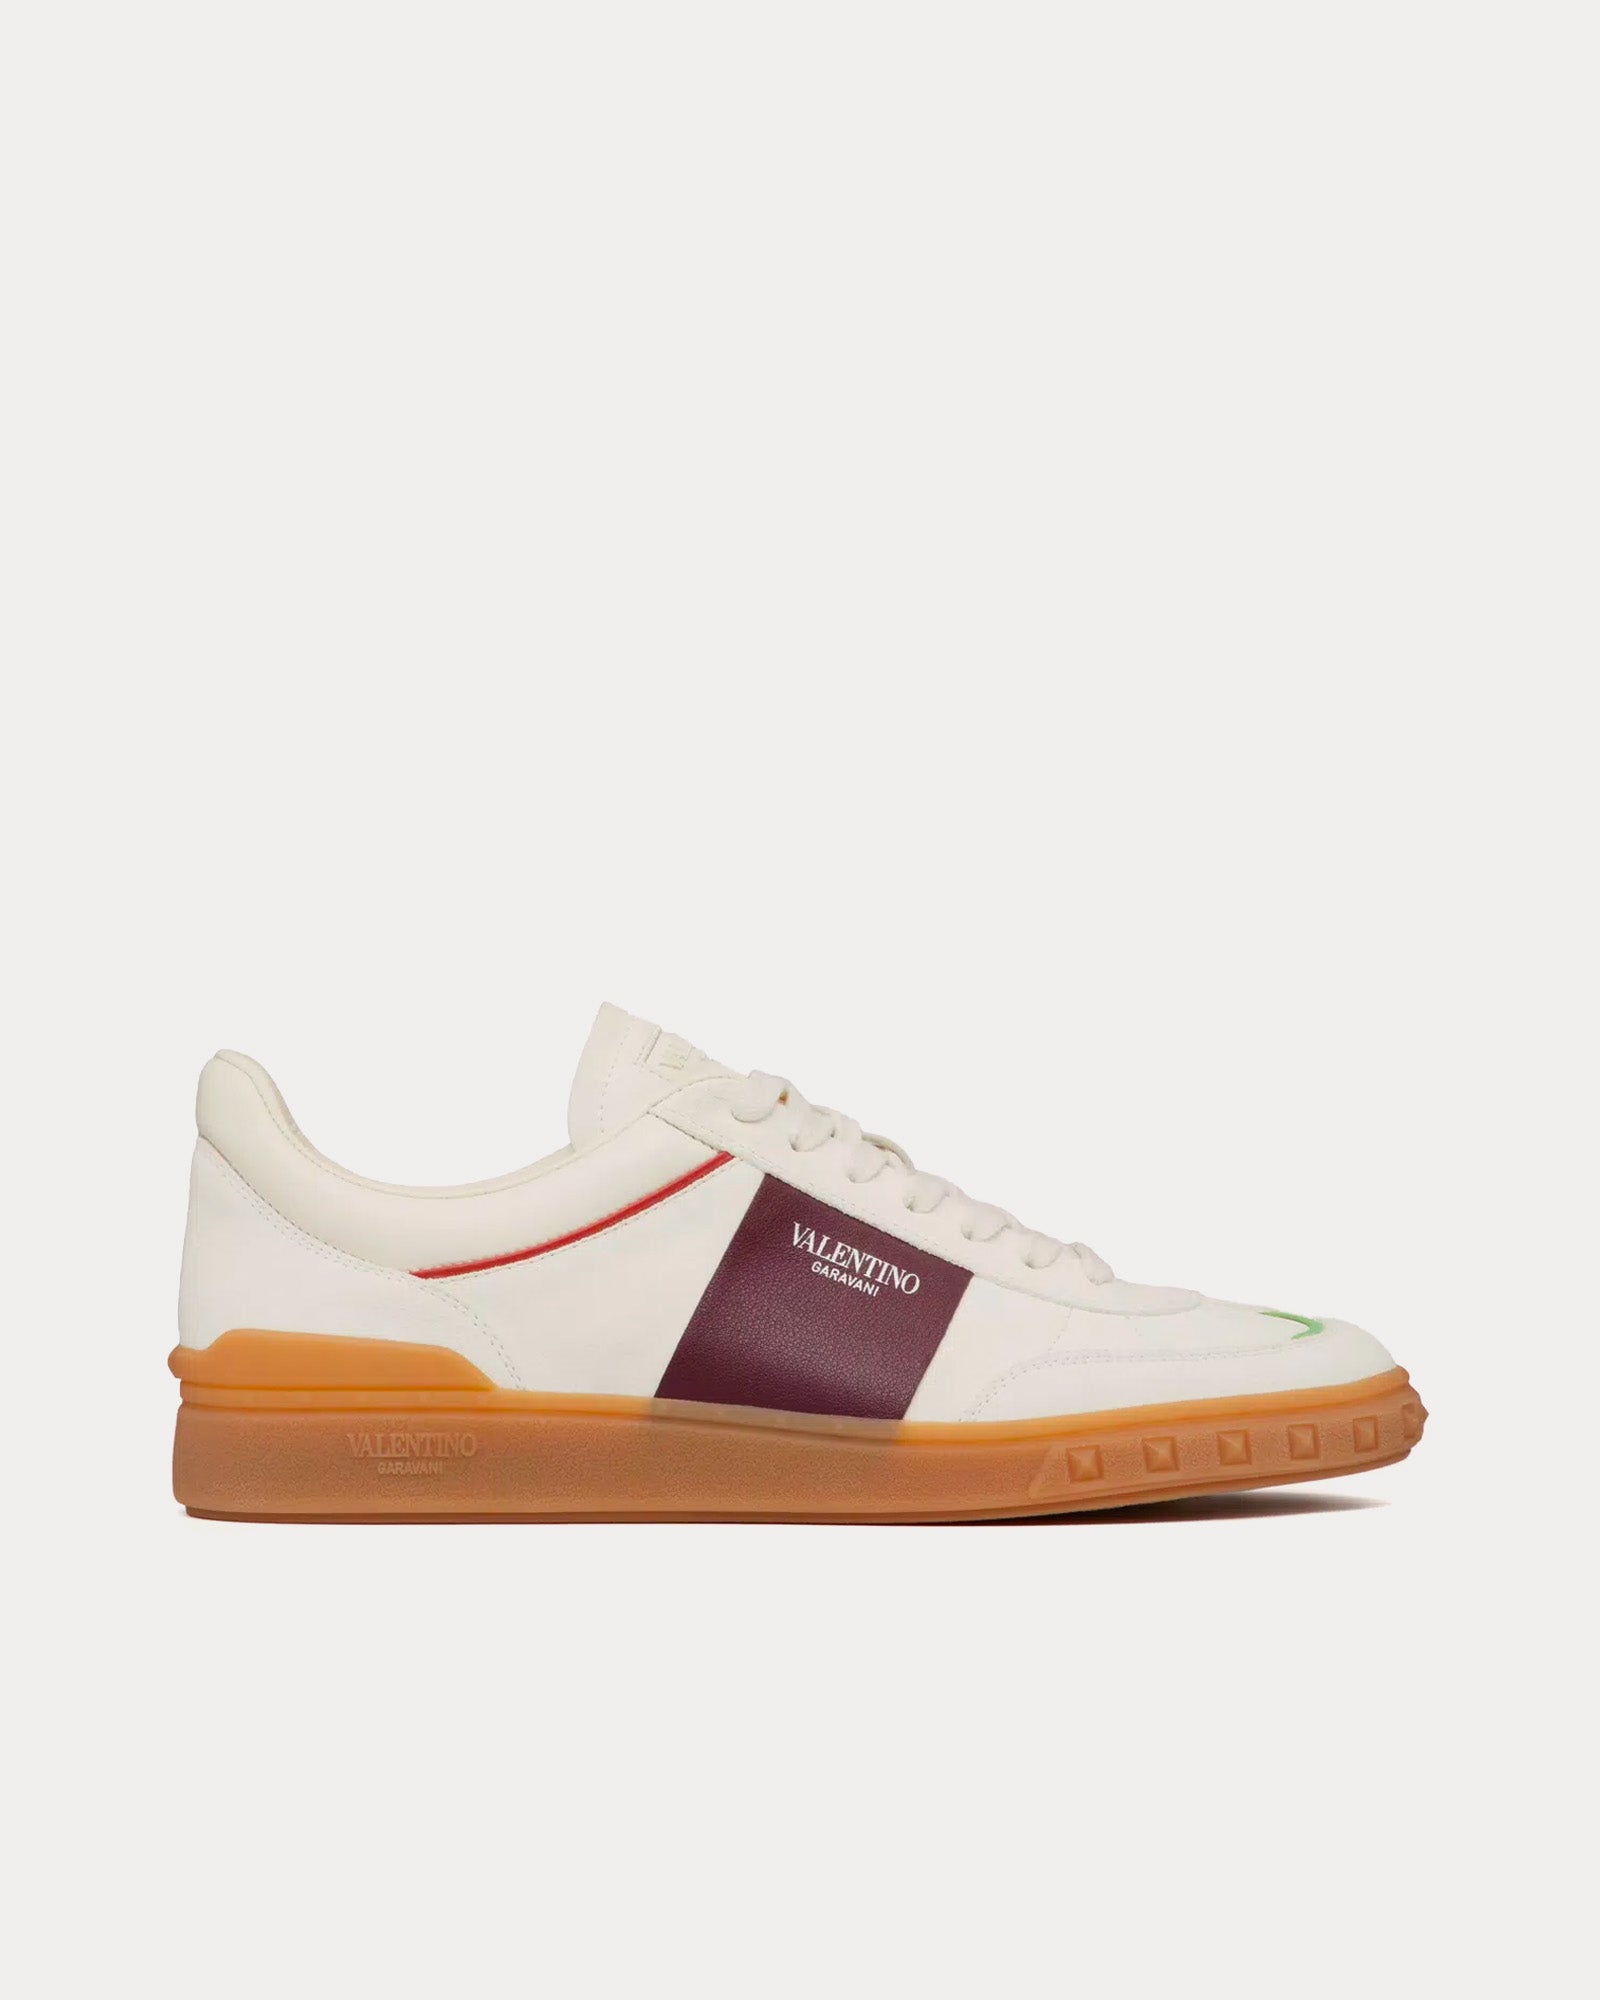 Valentino - Upvillage Leather Ivory / Wine / Mint / Amber Low Top Sneakers